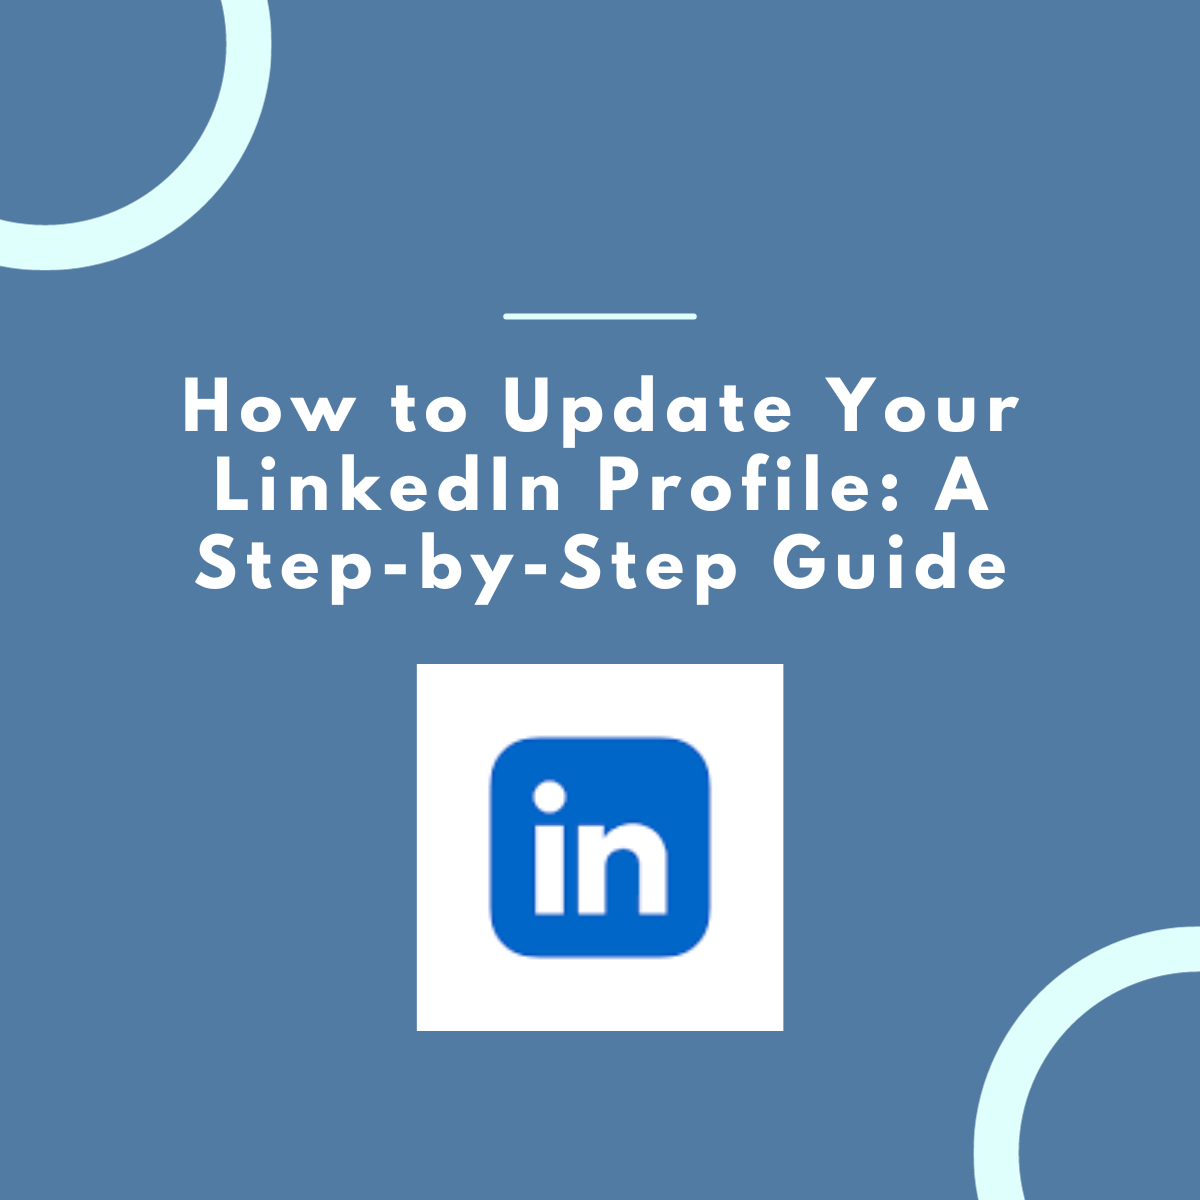 How to Update Your LinkedIn Profile: A Step-by-Step Guide